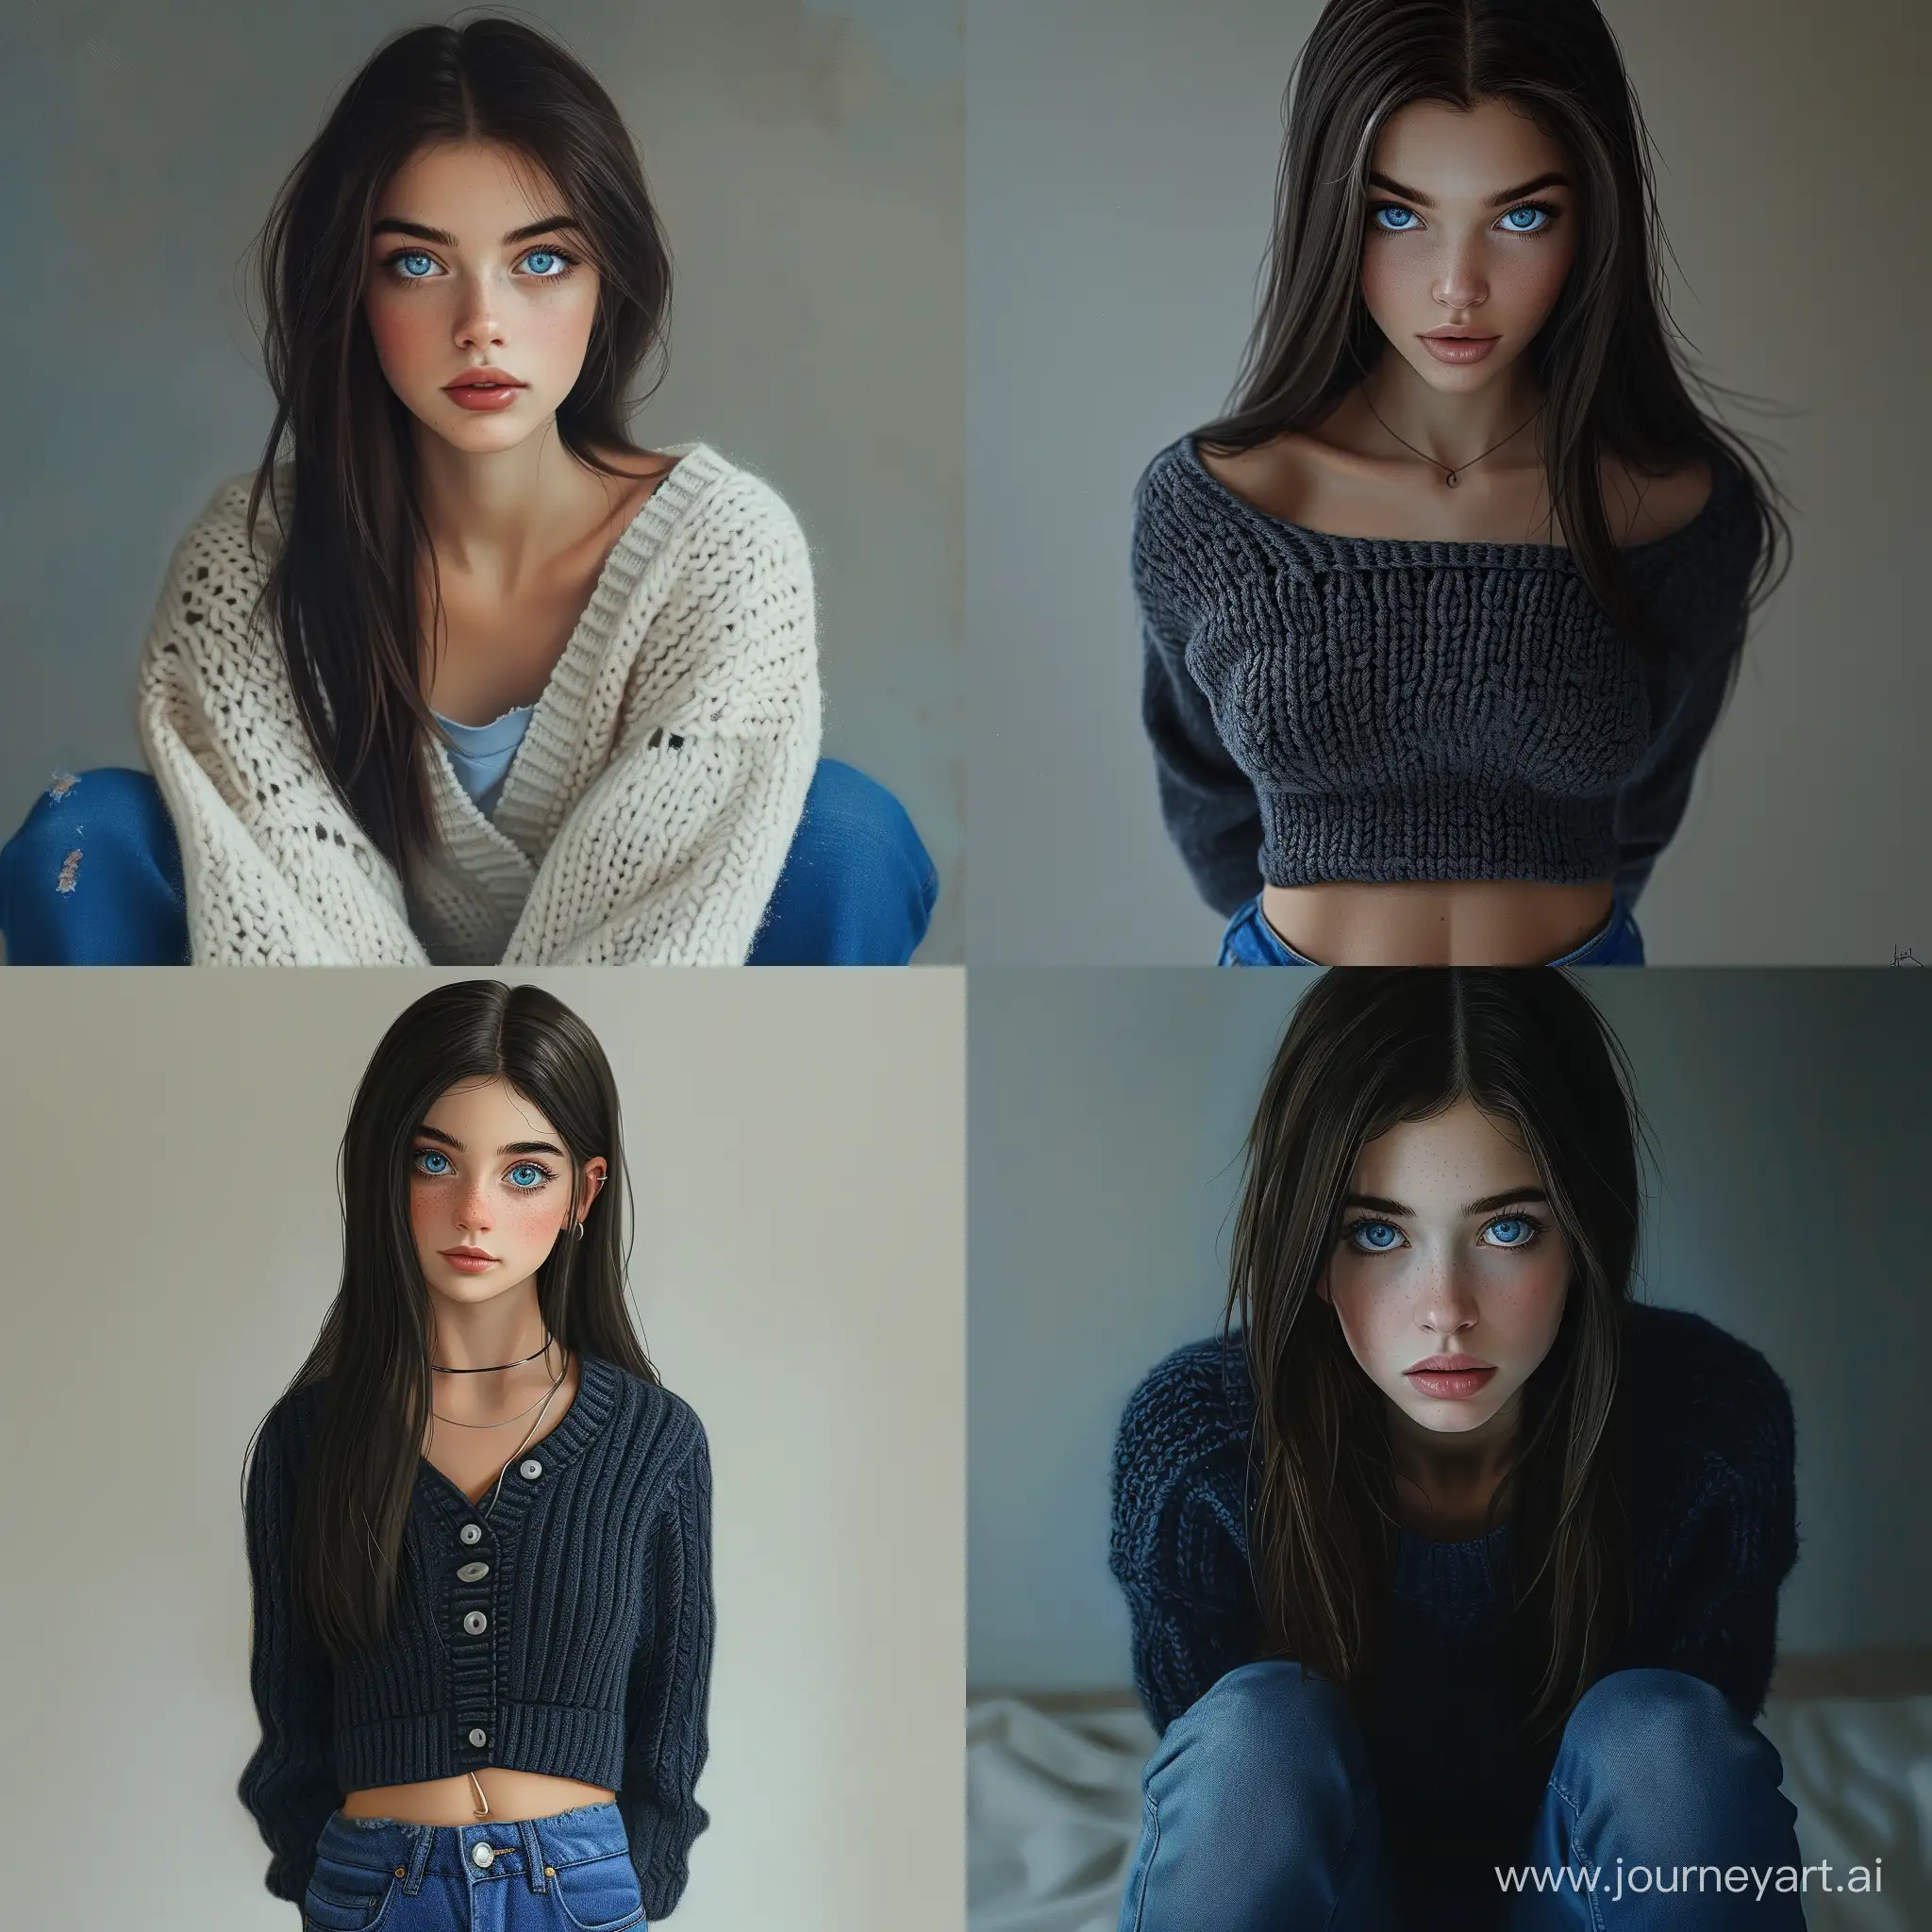 Beautiful girl, straight dark hair, blue eyes, light pale skin, thin upturned nose, oval face, condescending, teenager, 15 years old, knitted cardigan, blue jeans, high quality, high detail, realistic art